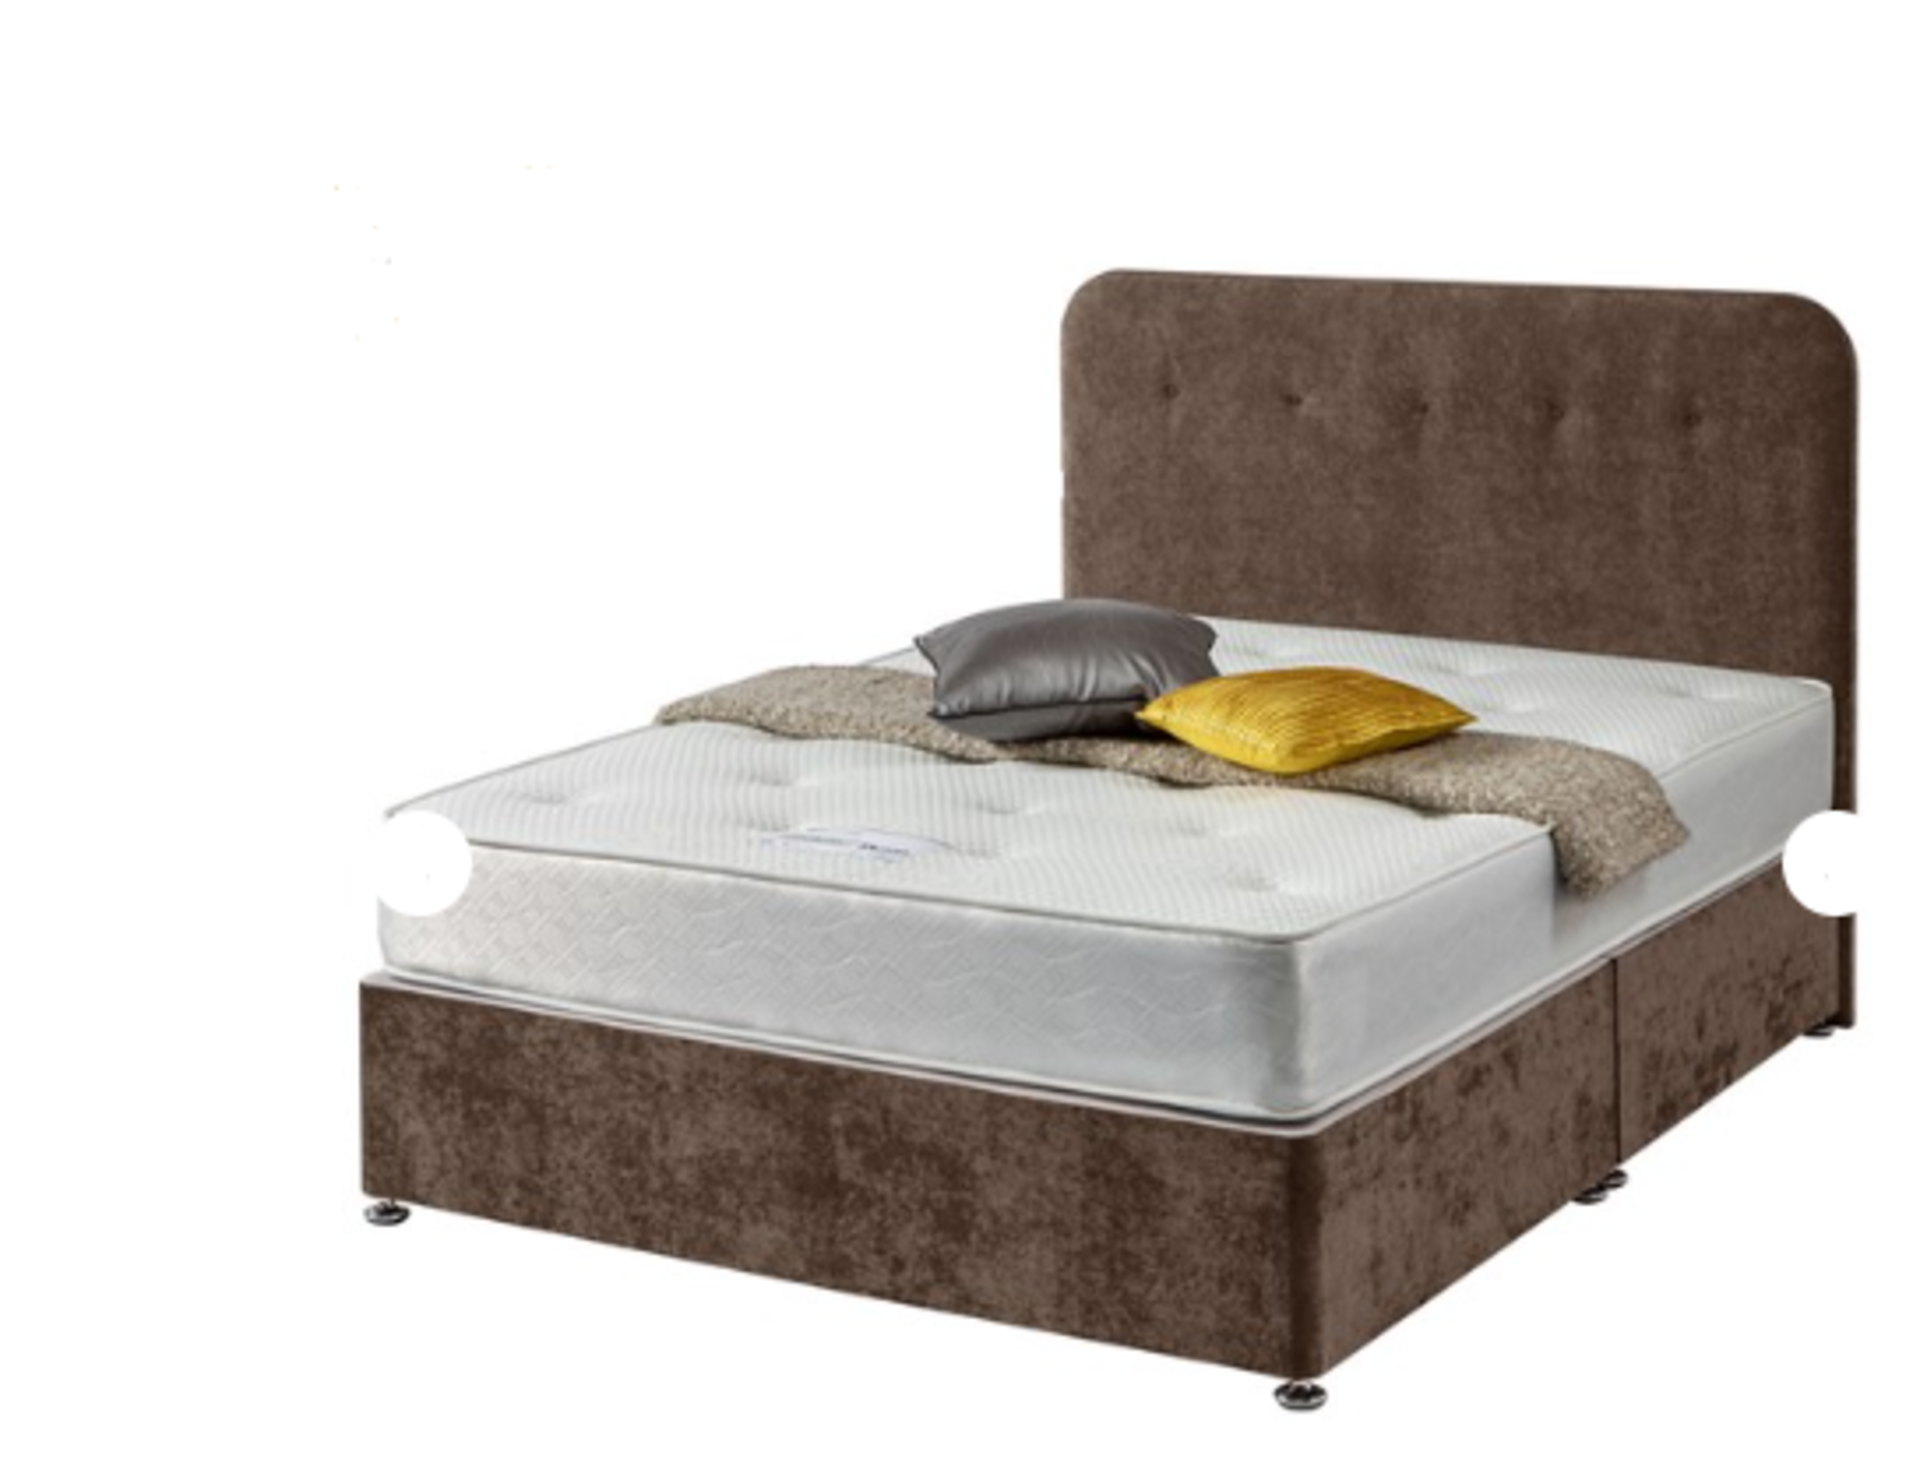 | 1X | SLEEPRIGHT GENOA DOUBLE 4FT6 135CM TAUPE 2-DRAWER BED BASE | ONE HALF NEEDS ATTENTION DUE